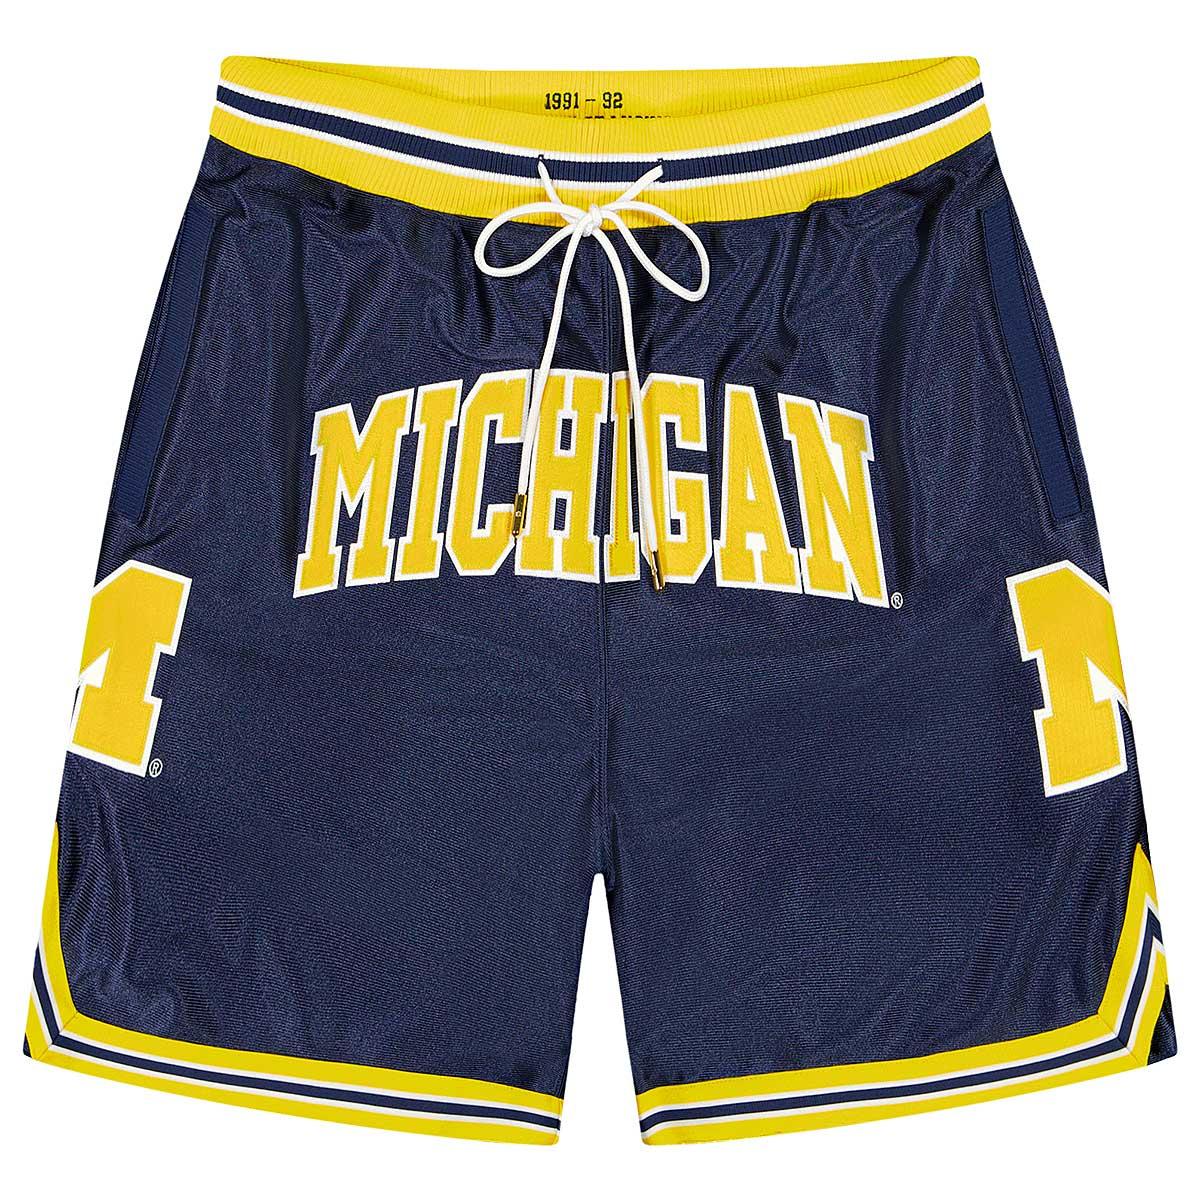 1000% Authentic Michigan Jordan just don shorts Sz Small. Very Rare To Find